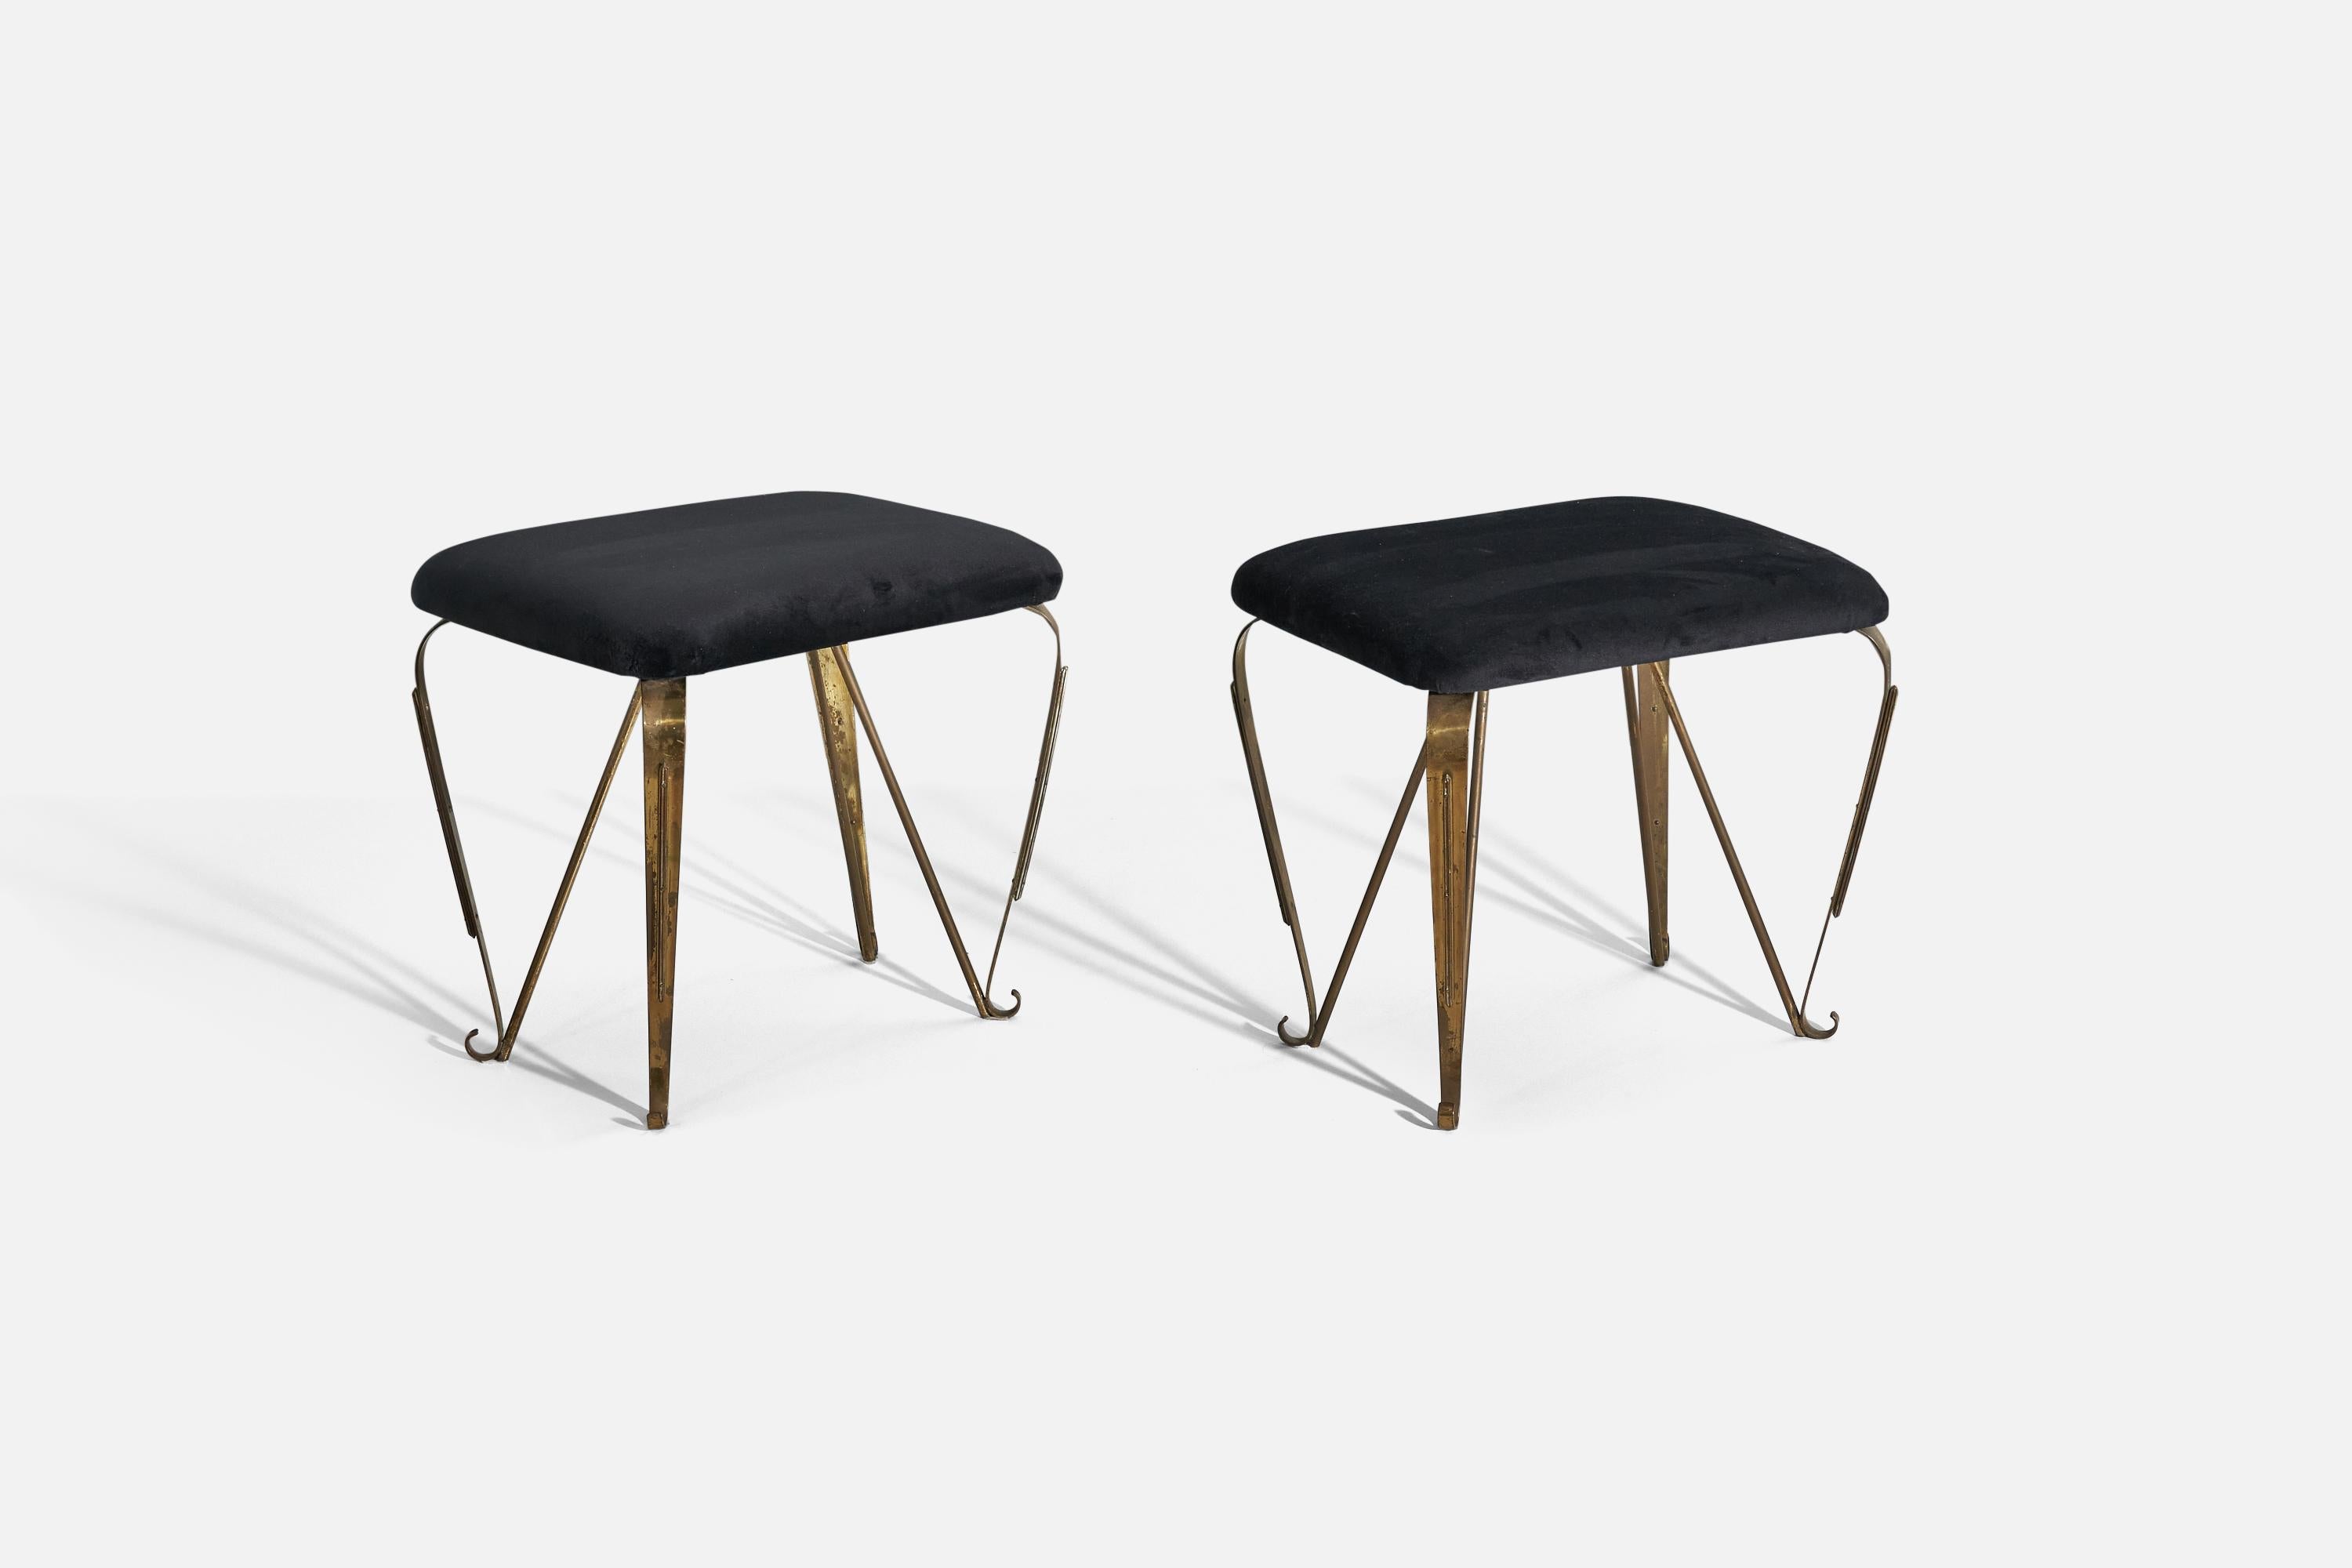 A pair of brass and black velvet stools designed and produced in Italy, 1940s.